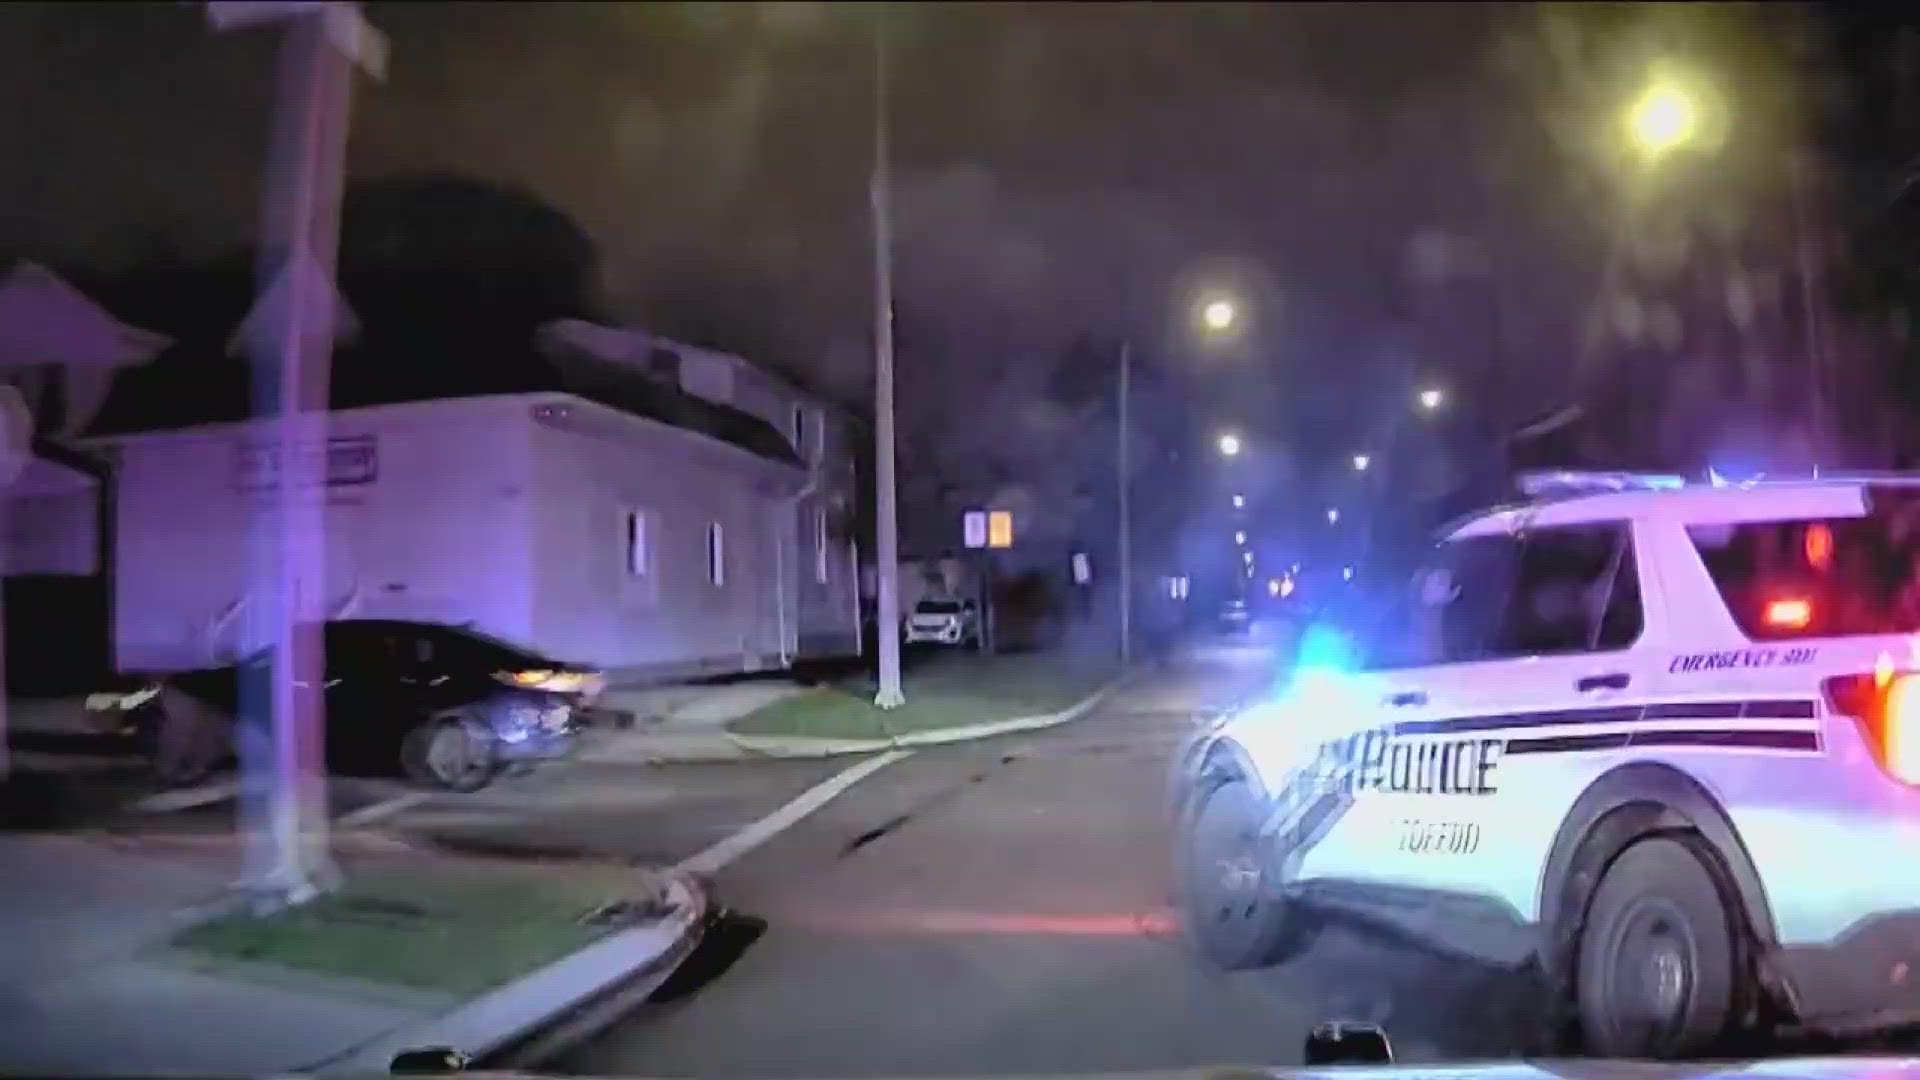 Dashcam video shows two TPD cruisers colliding while officers were responding to a call.